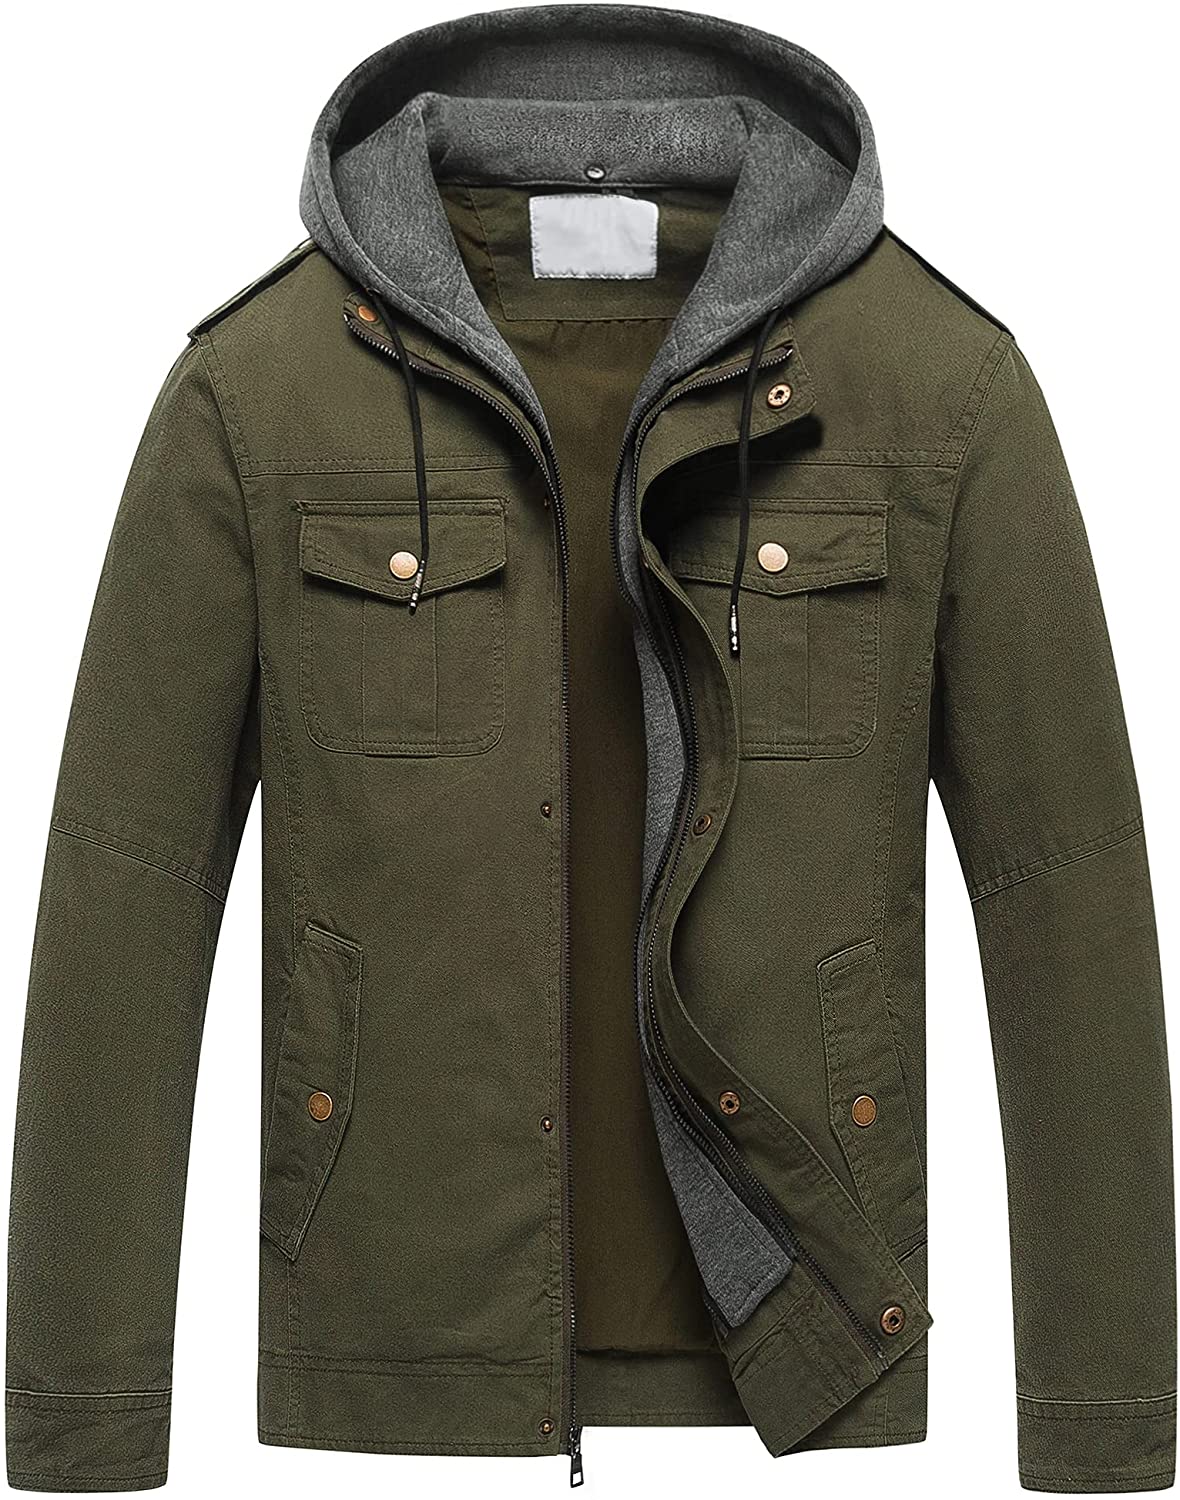 Pursky Men's Military Jacket Casual Washed Cotton Hooded Canvas Coat Fall Coat 